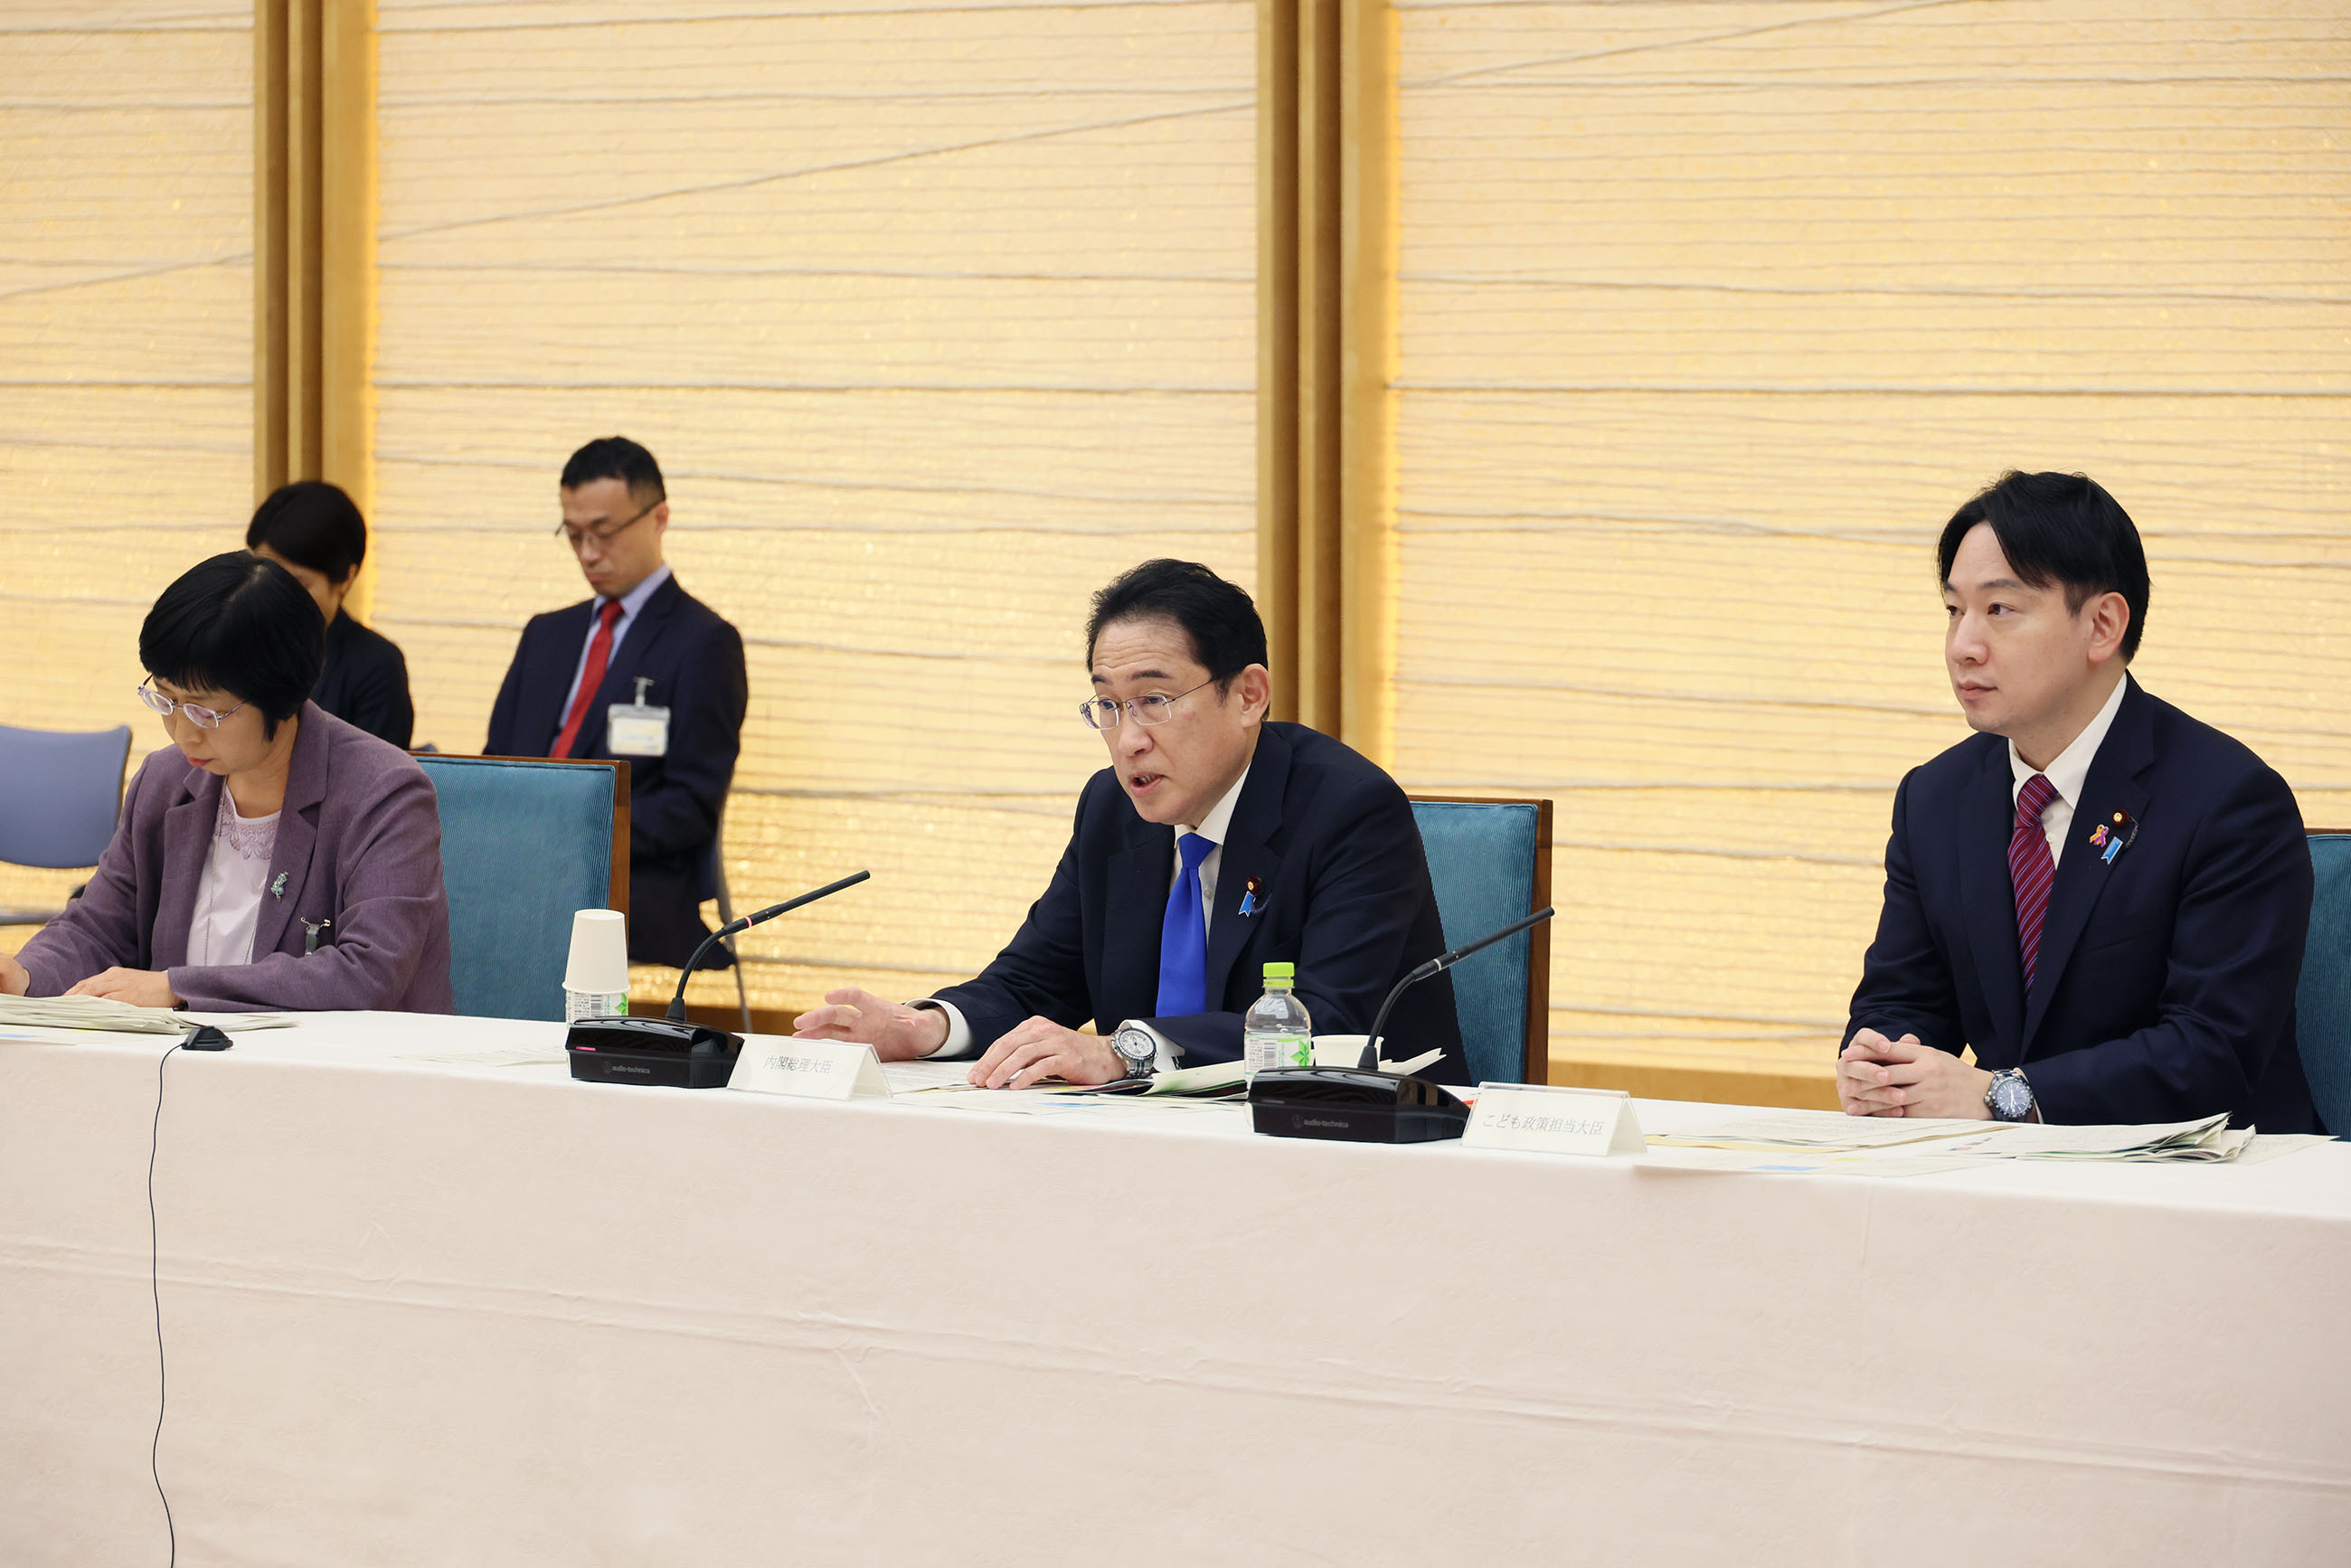 Prime Minister Kishida hearing from experts in public hearing (3)